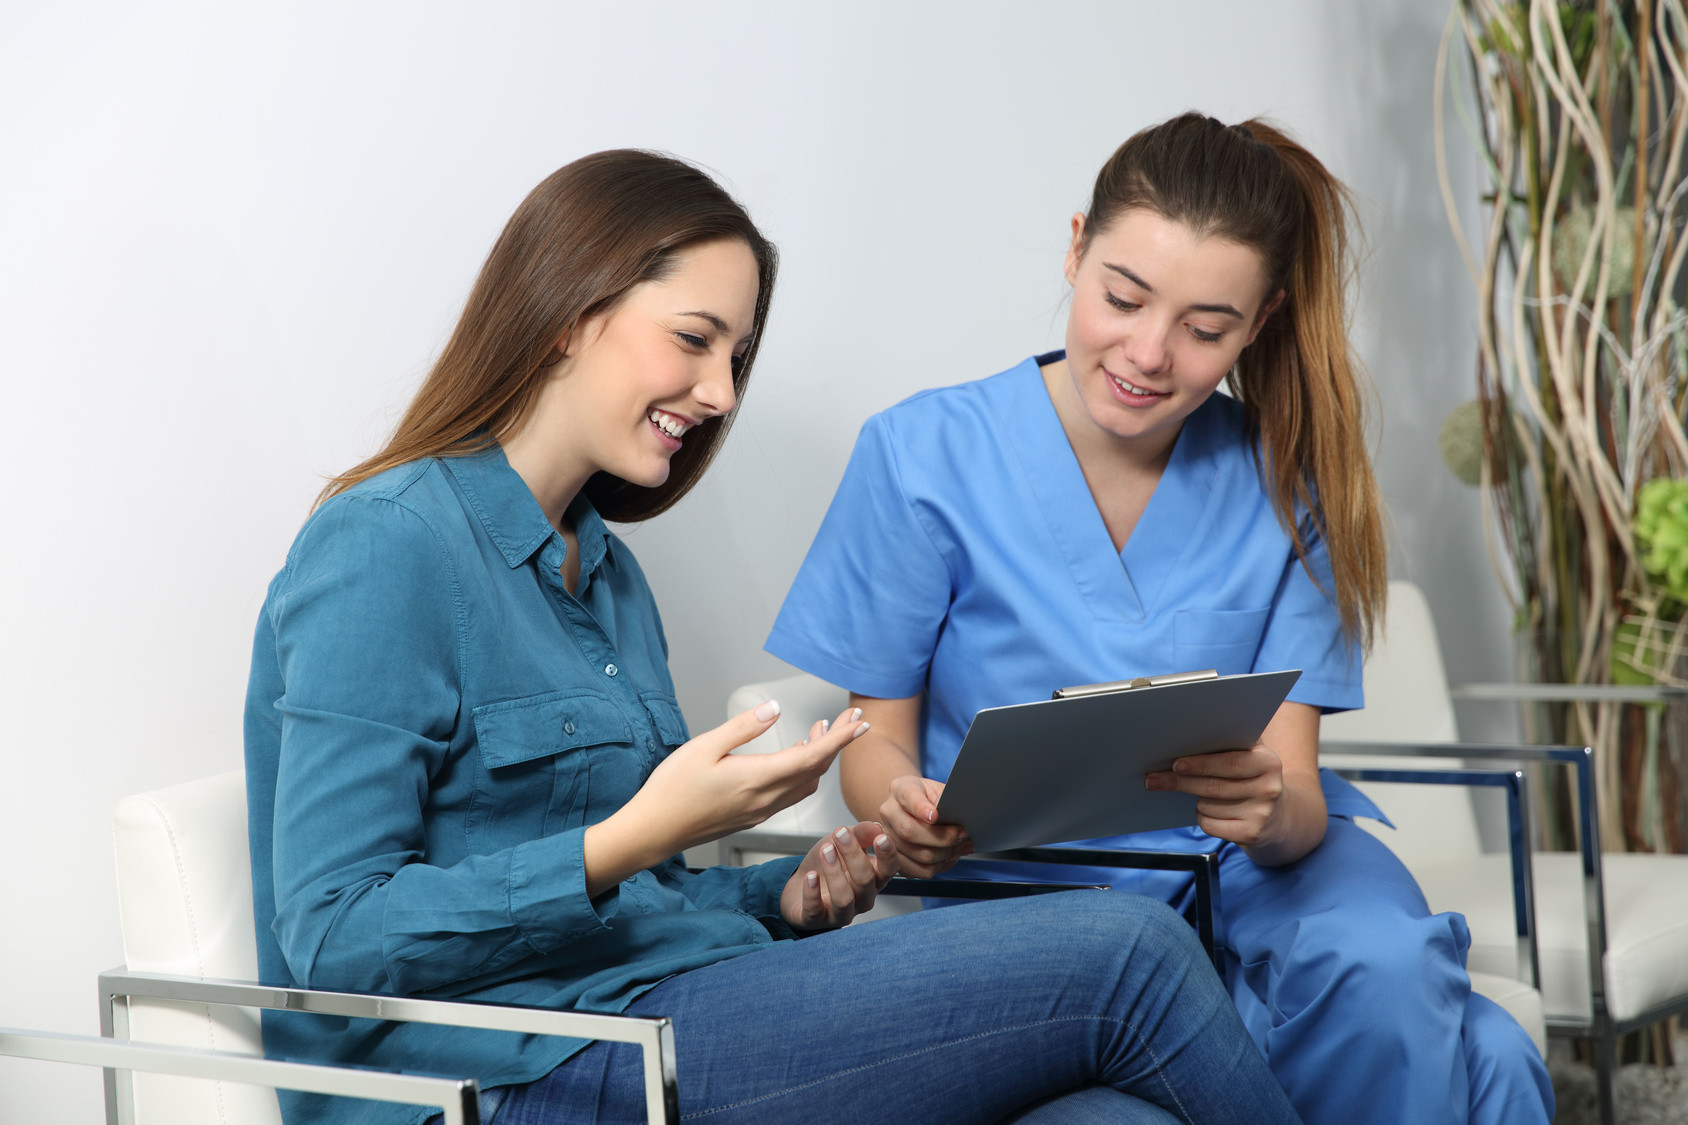 Further training in treatment care techniques for nursing assistants